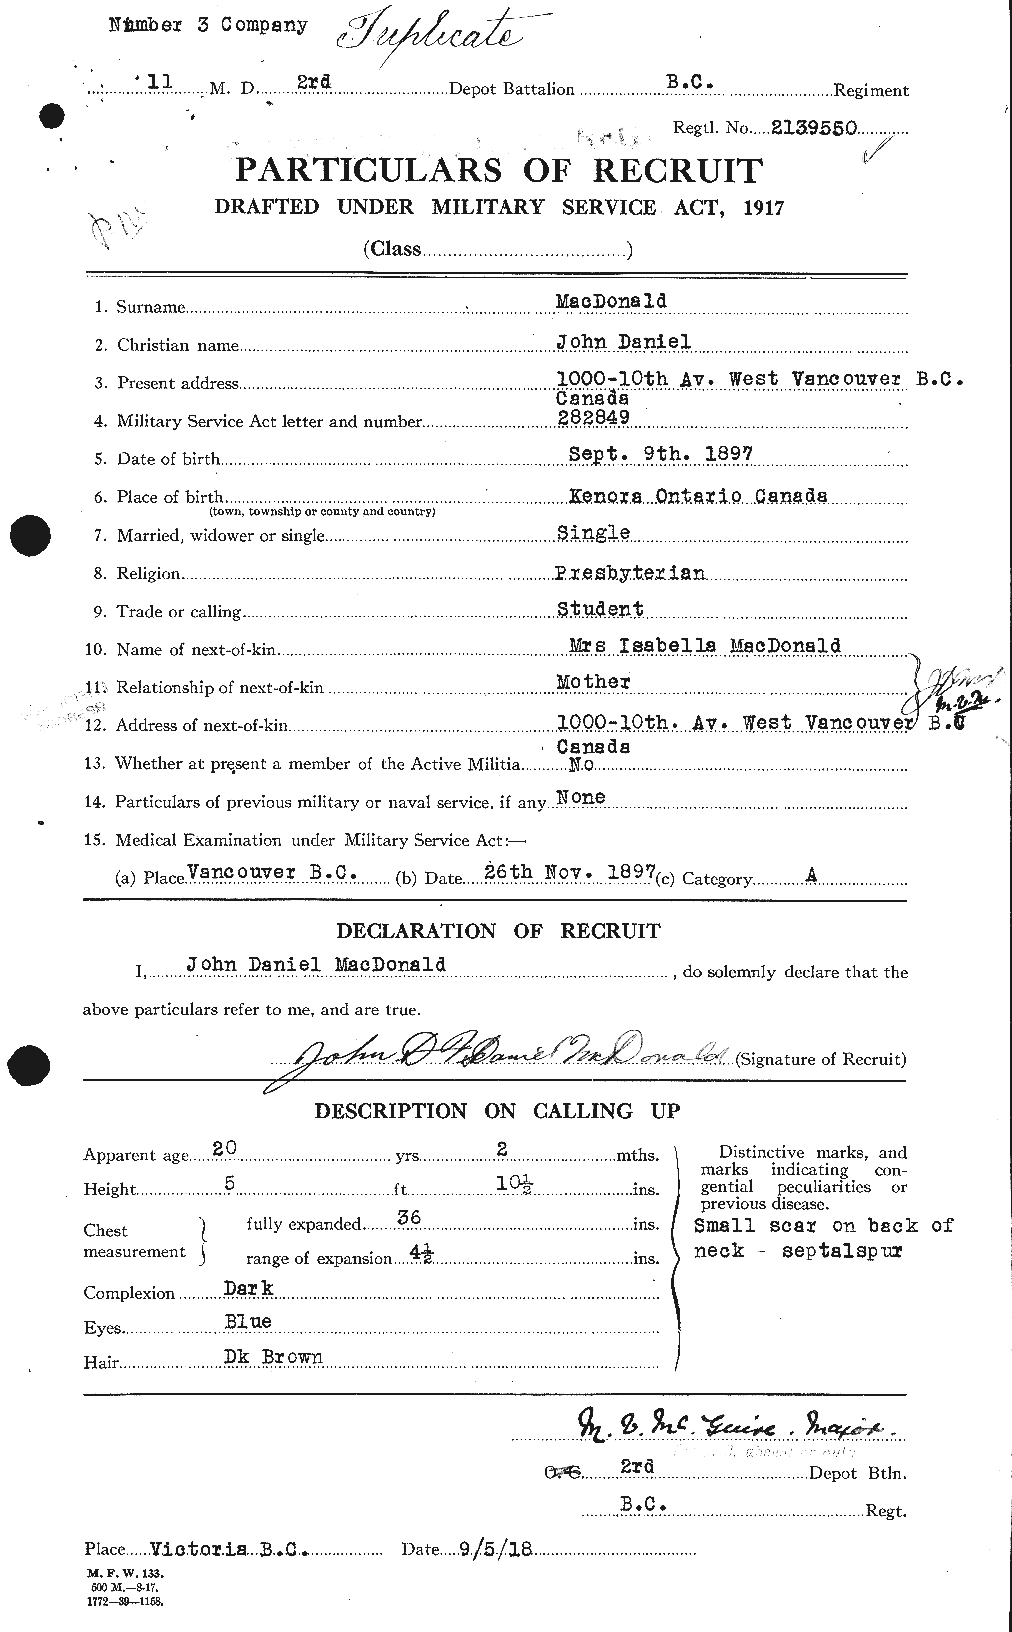 Personnel Records of the First World War - CEF 519413a